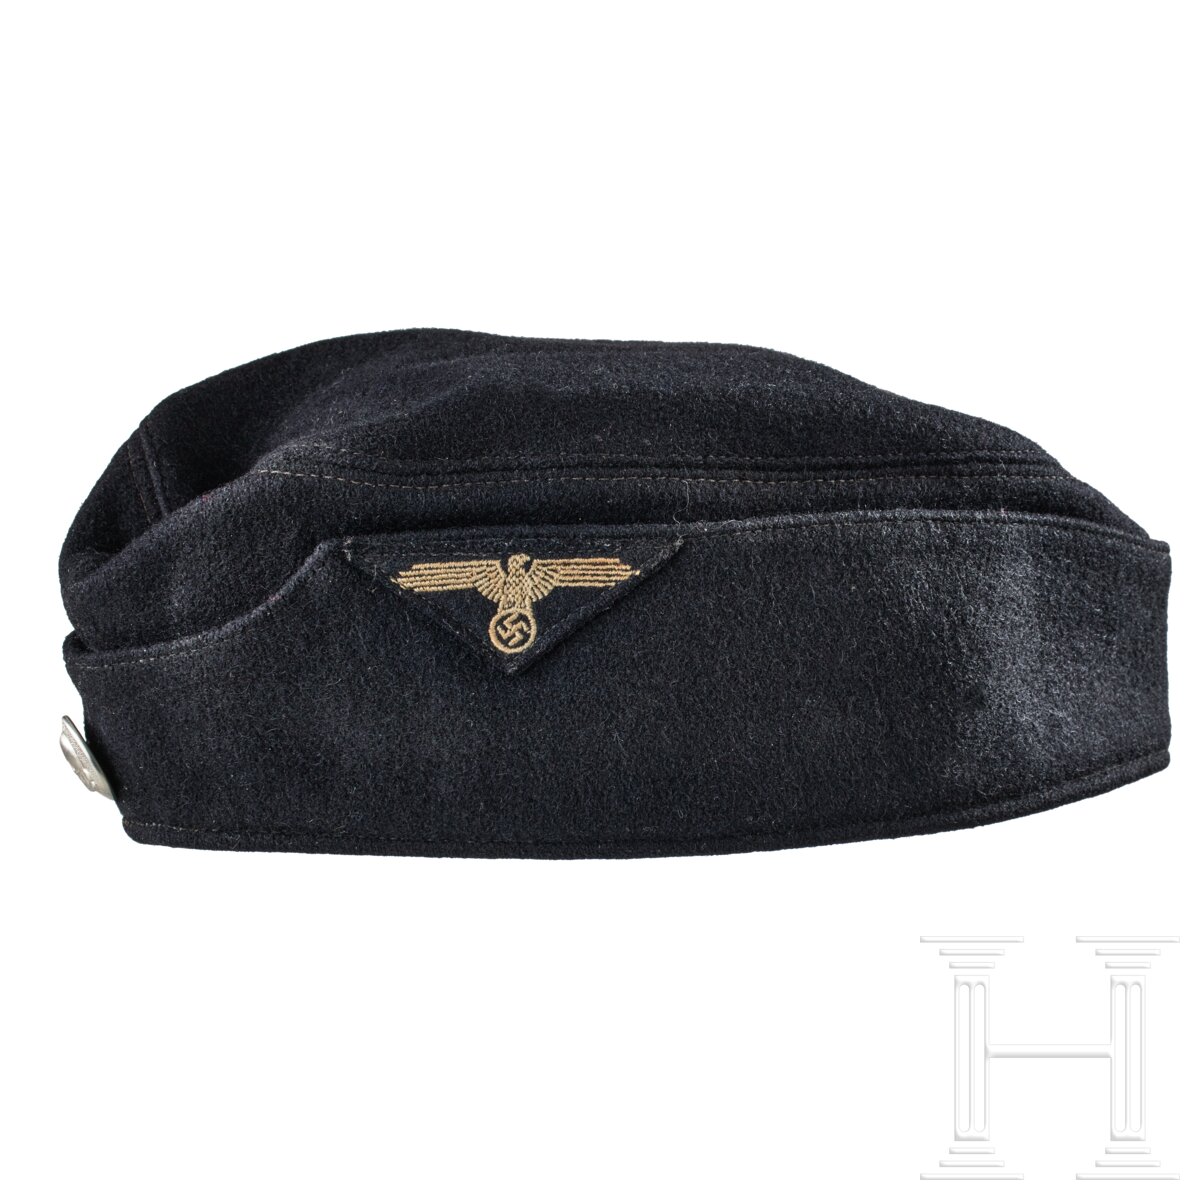 A Field Cap for Allgemeine SS Enlisted/NCO - Image 3 of 11